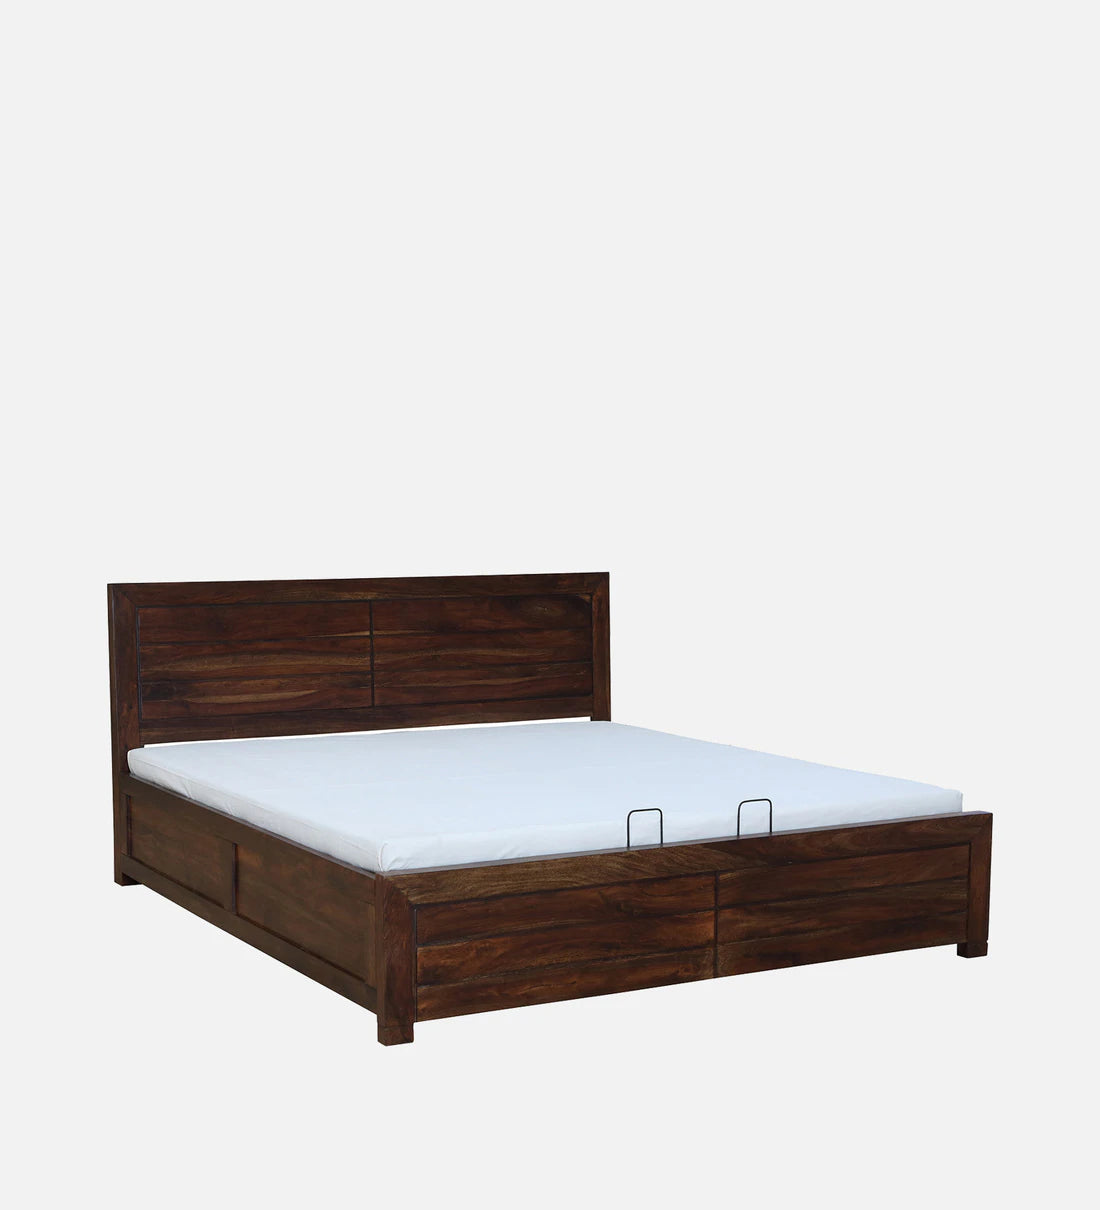 Sheesham Wood King Size Bed In Provincial Teak Finish With Hydraulic Storage